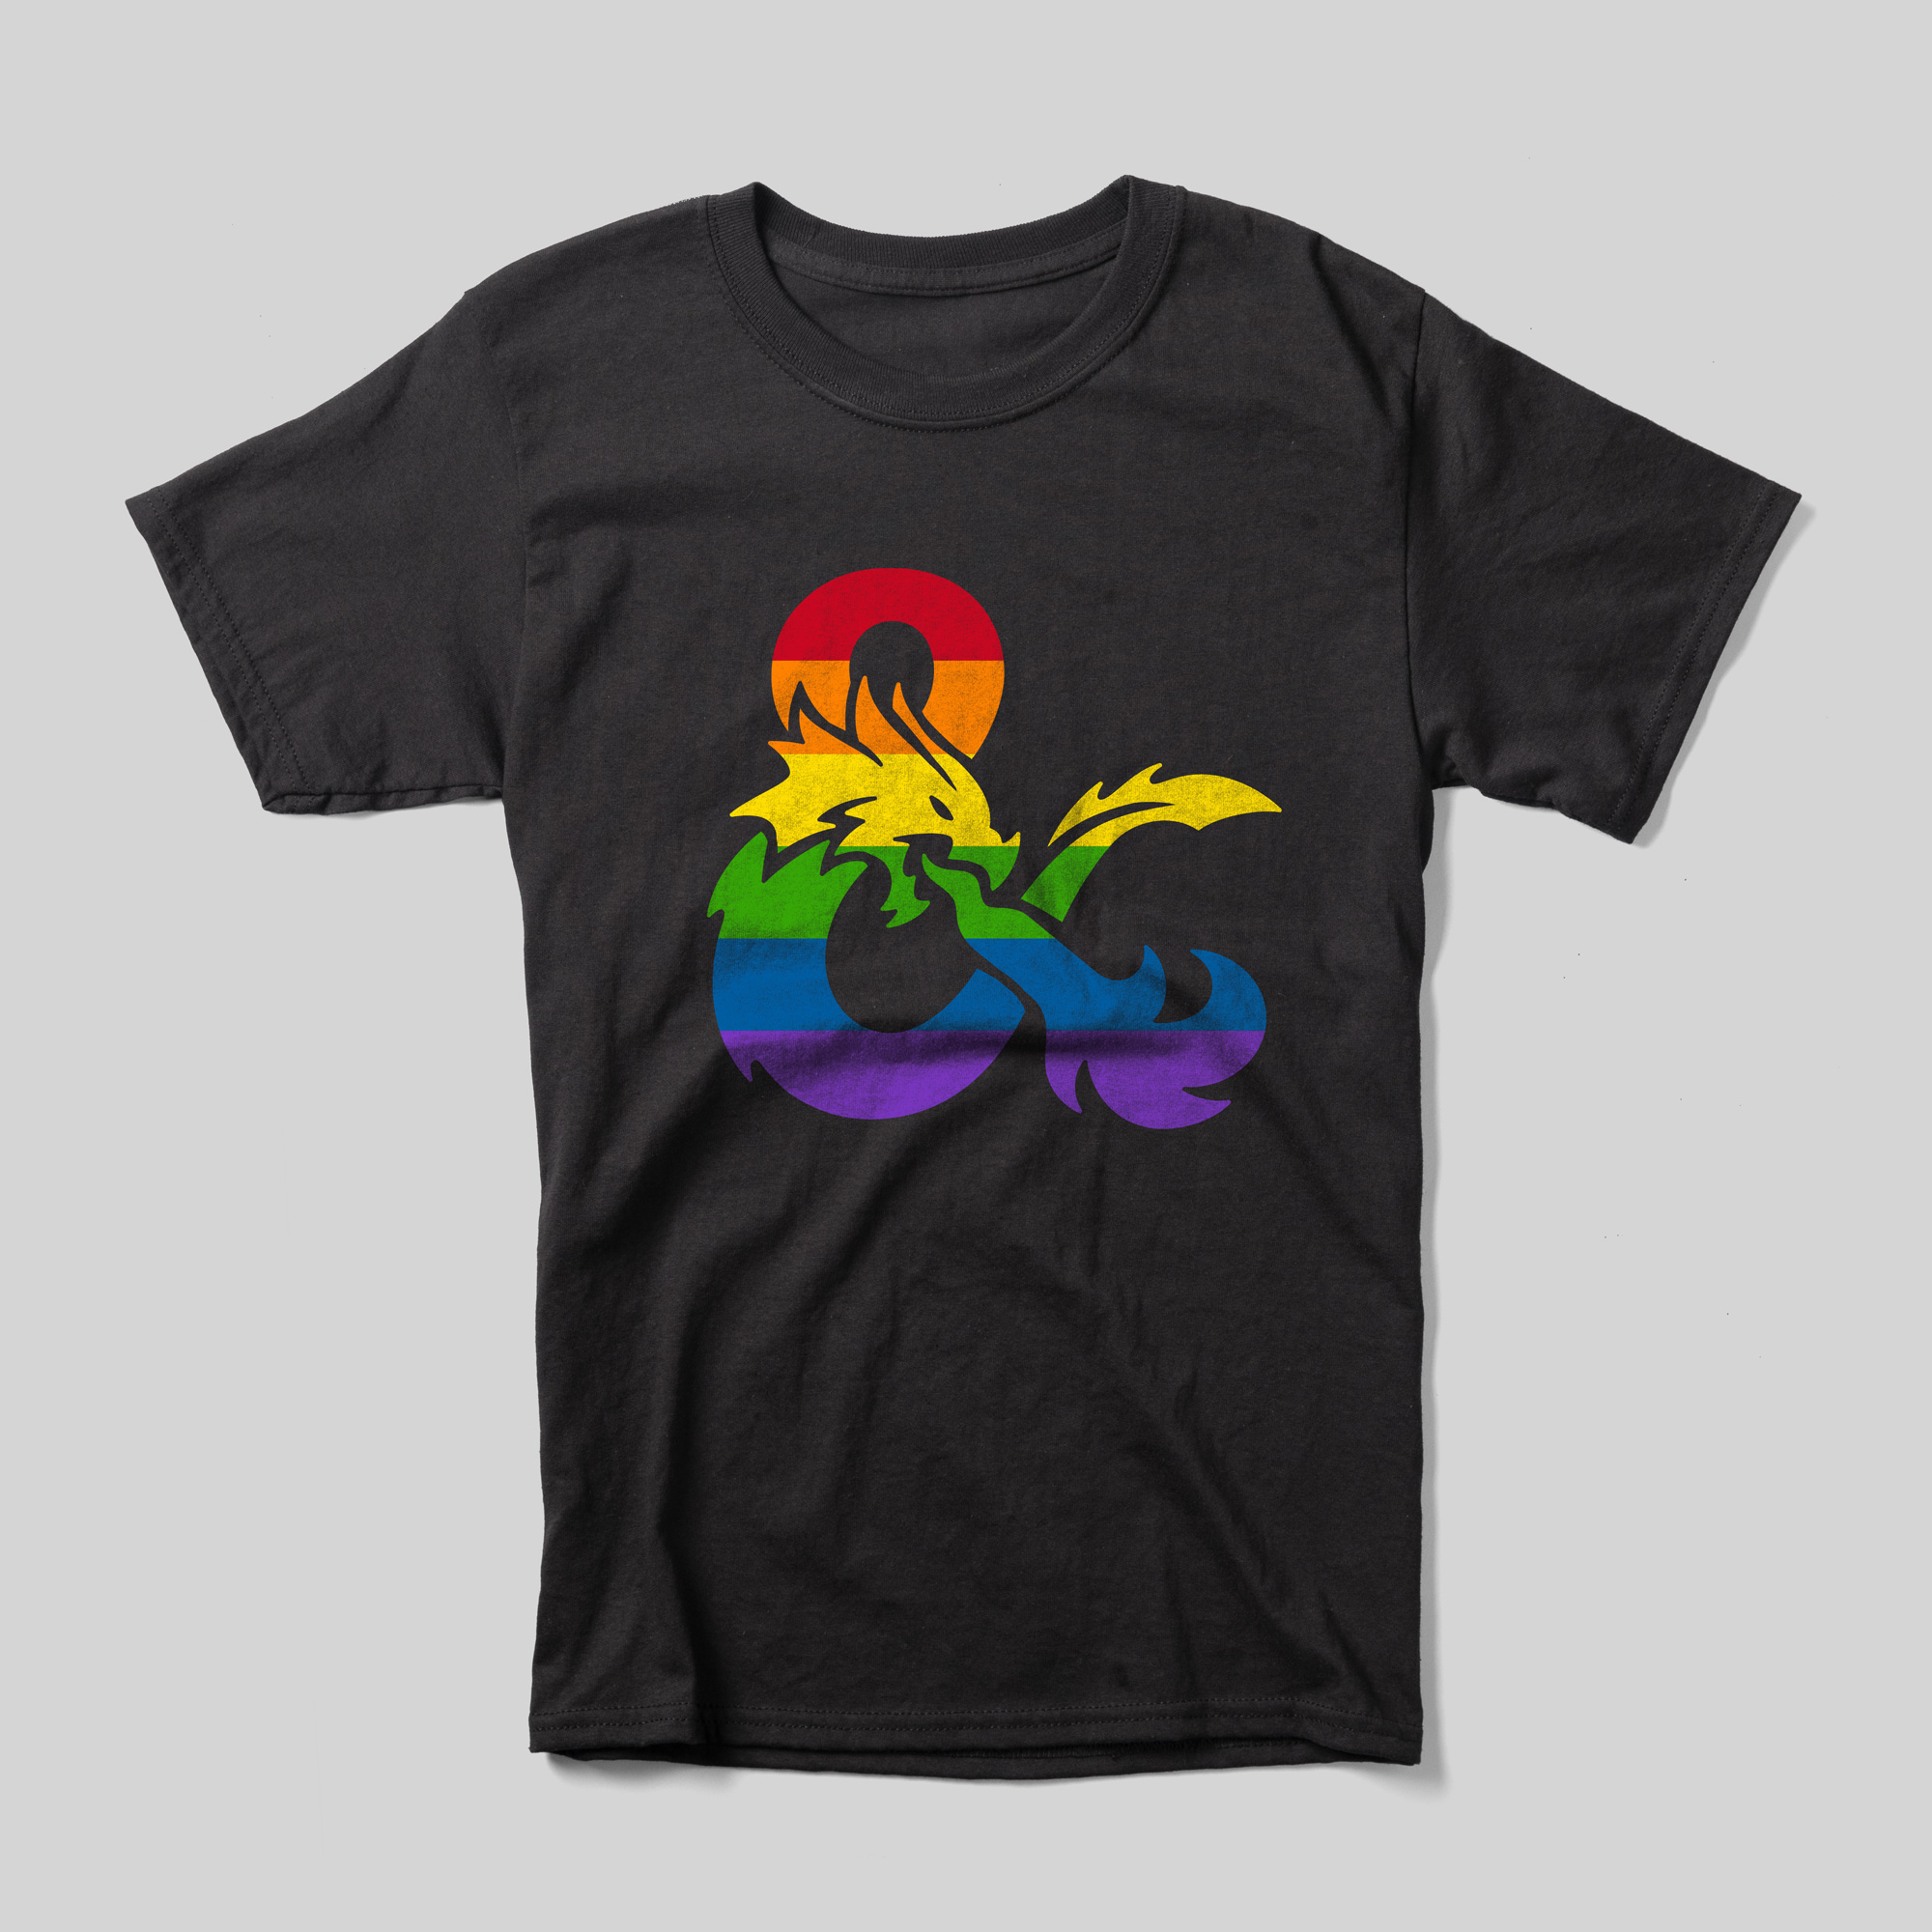 A black t-shirt displaying the ampersand (&) from the Dungeons & Dragons logo with rainbow colors.